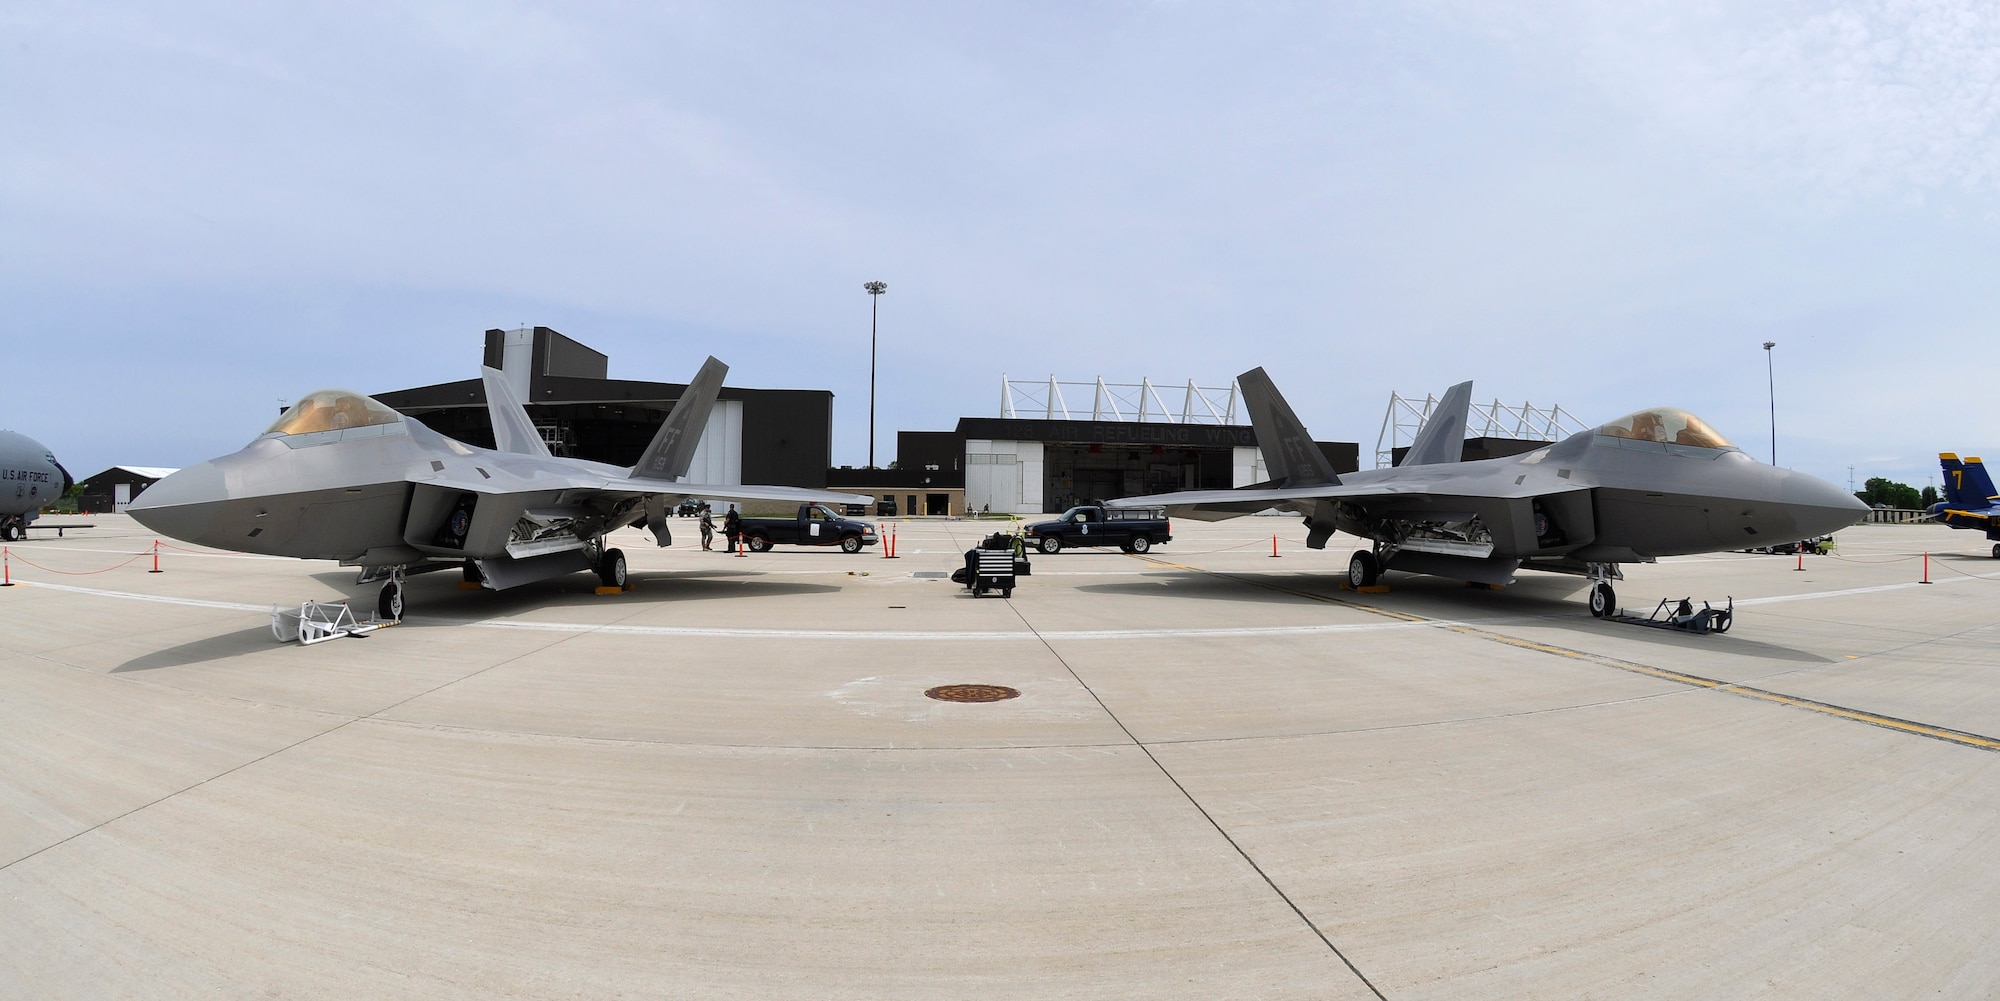 F-22 Raptors, assigned to the Air Force Aerial Demonstration Team at Langley Air Force Base, VA, stand by on the ramp of the 128th Air Refueling Wing, Gen. Mitchell International Airport, WI, on Thursday, June 10, 2010.  The Raptors participated in the 2010 Milwaukee Air and Water Show, which showcased the capabilities and skills of Air Force pilots and aircraft.  (U.S. Air Force photo by Staff Sgt. Jeremy Wilson / Released)